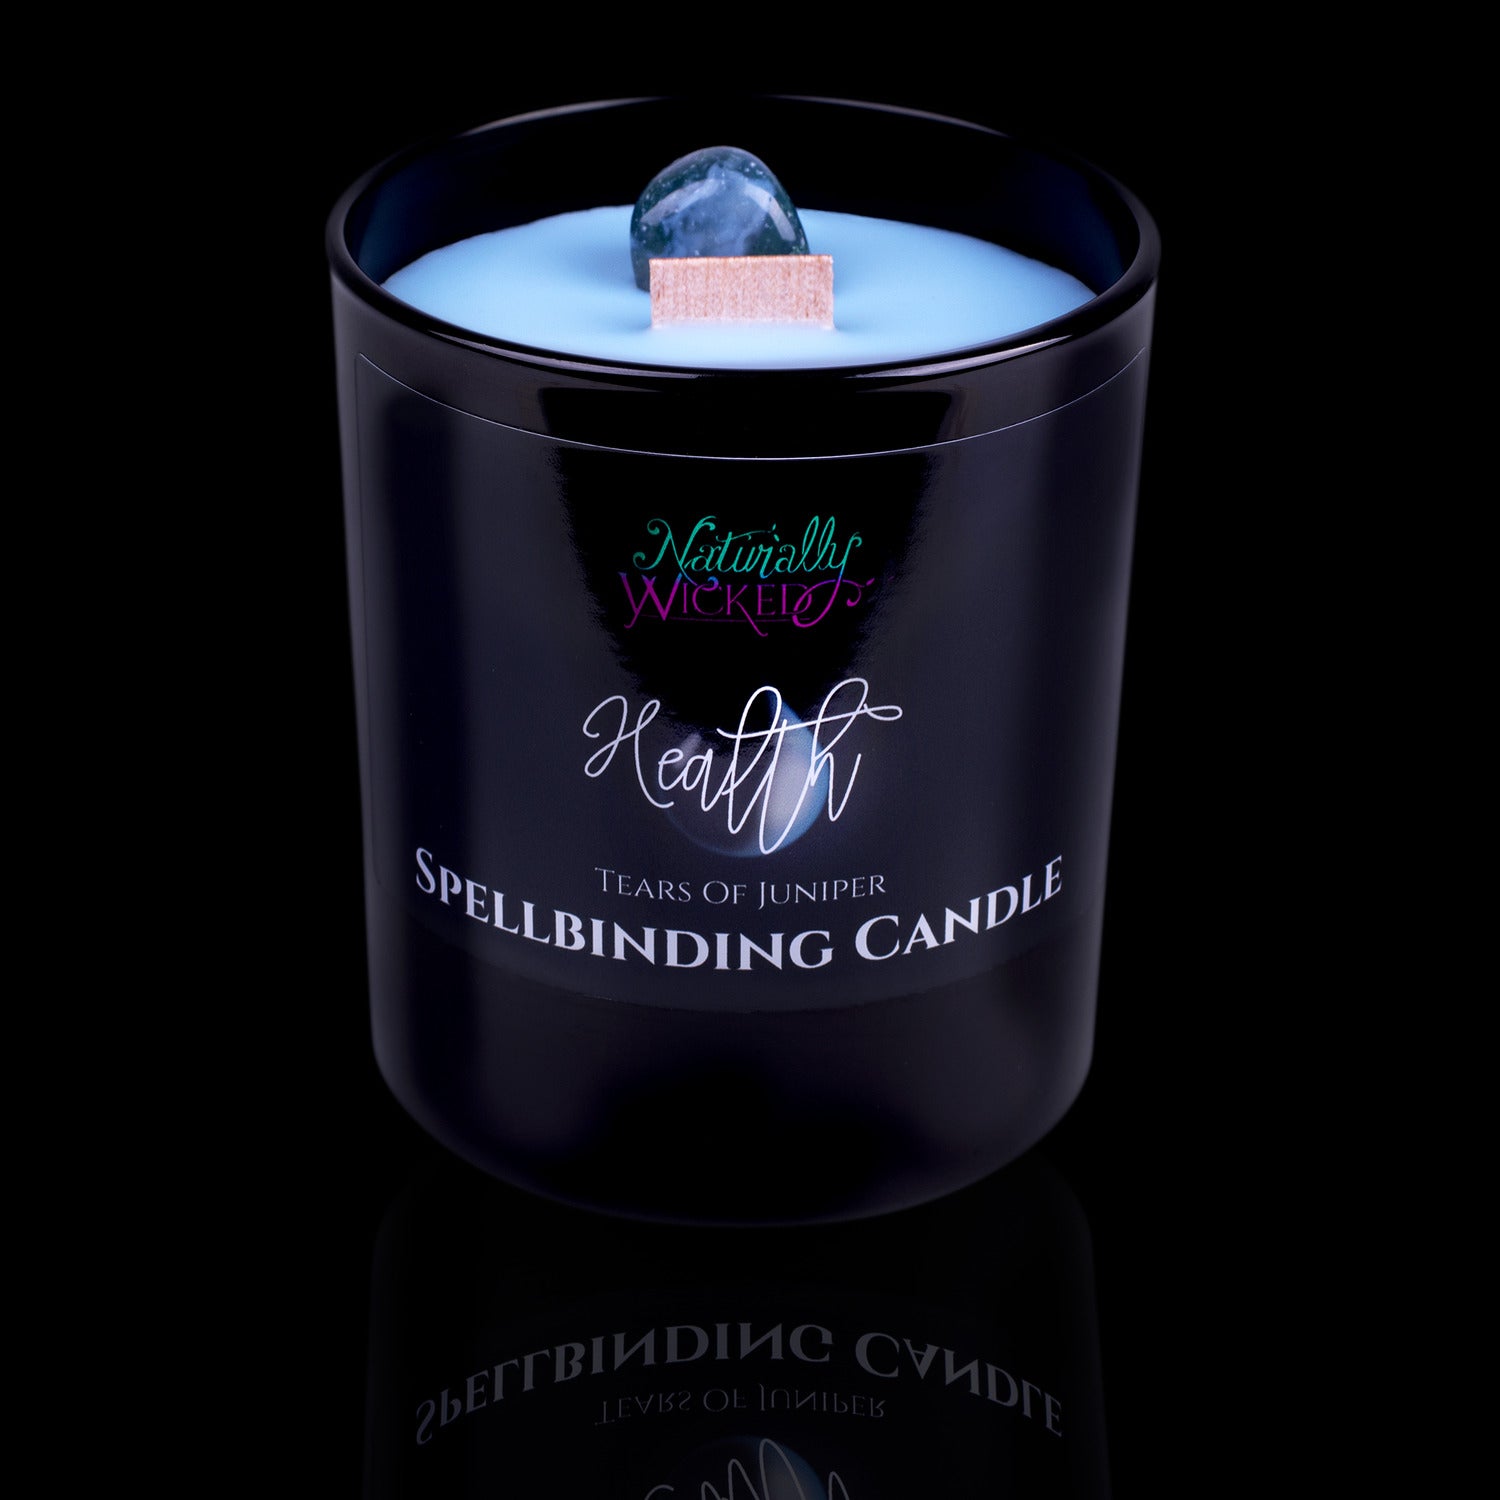 Give The Gift Of Great Health. Naturally Wicked Spellbinding Health Crystal Candle Entombed In Blue Plant-Based Wax With Crackling Wood Wick & Teal Banded Agate Crystal